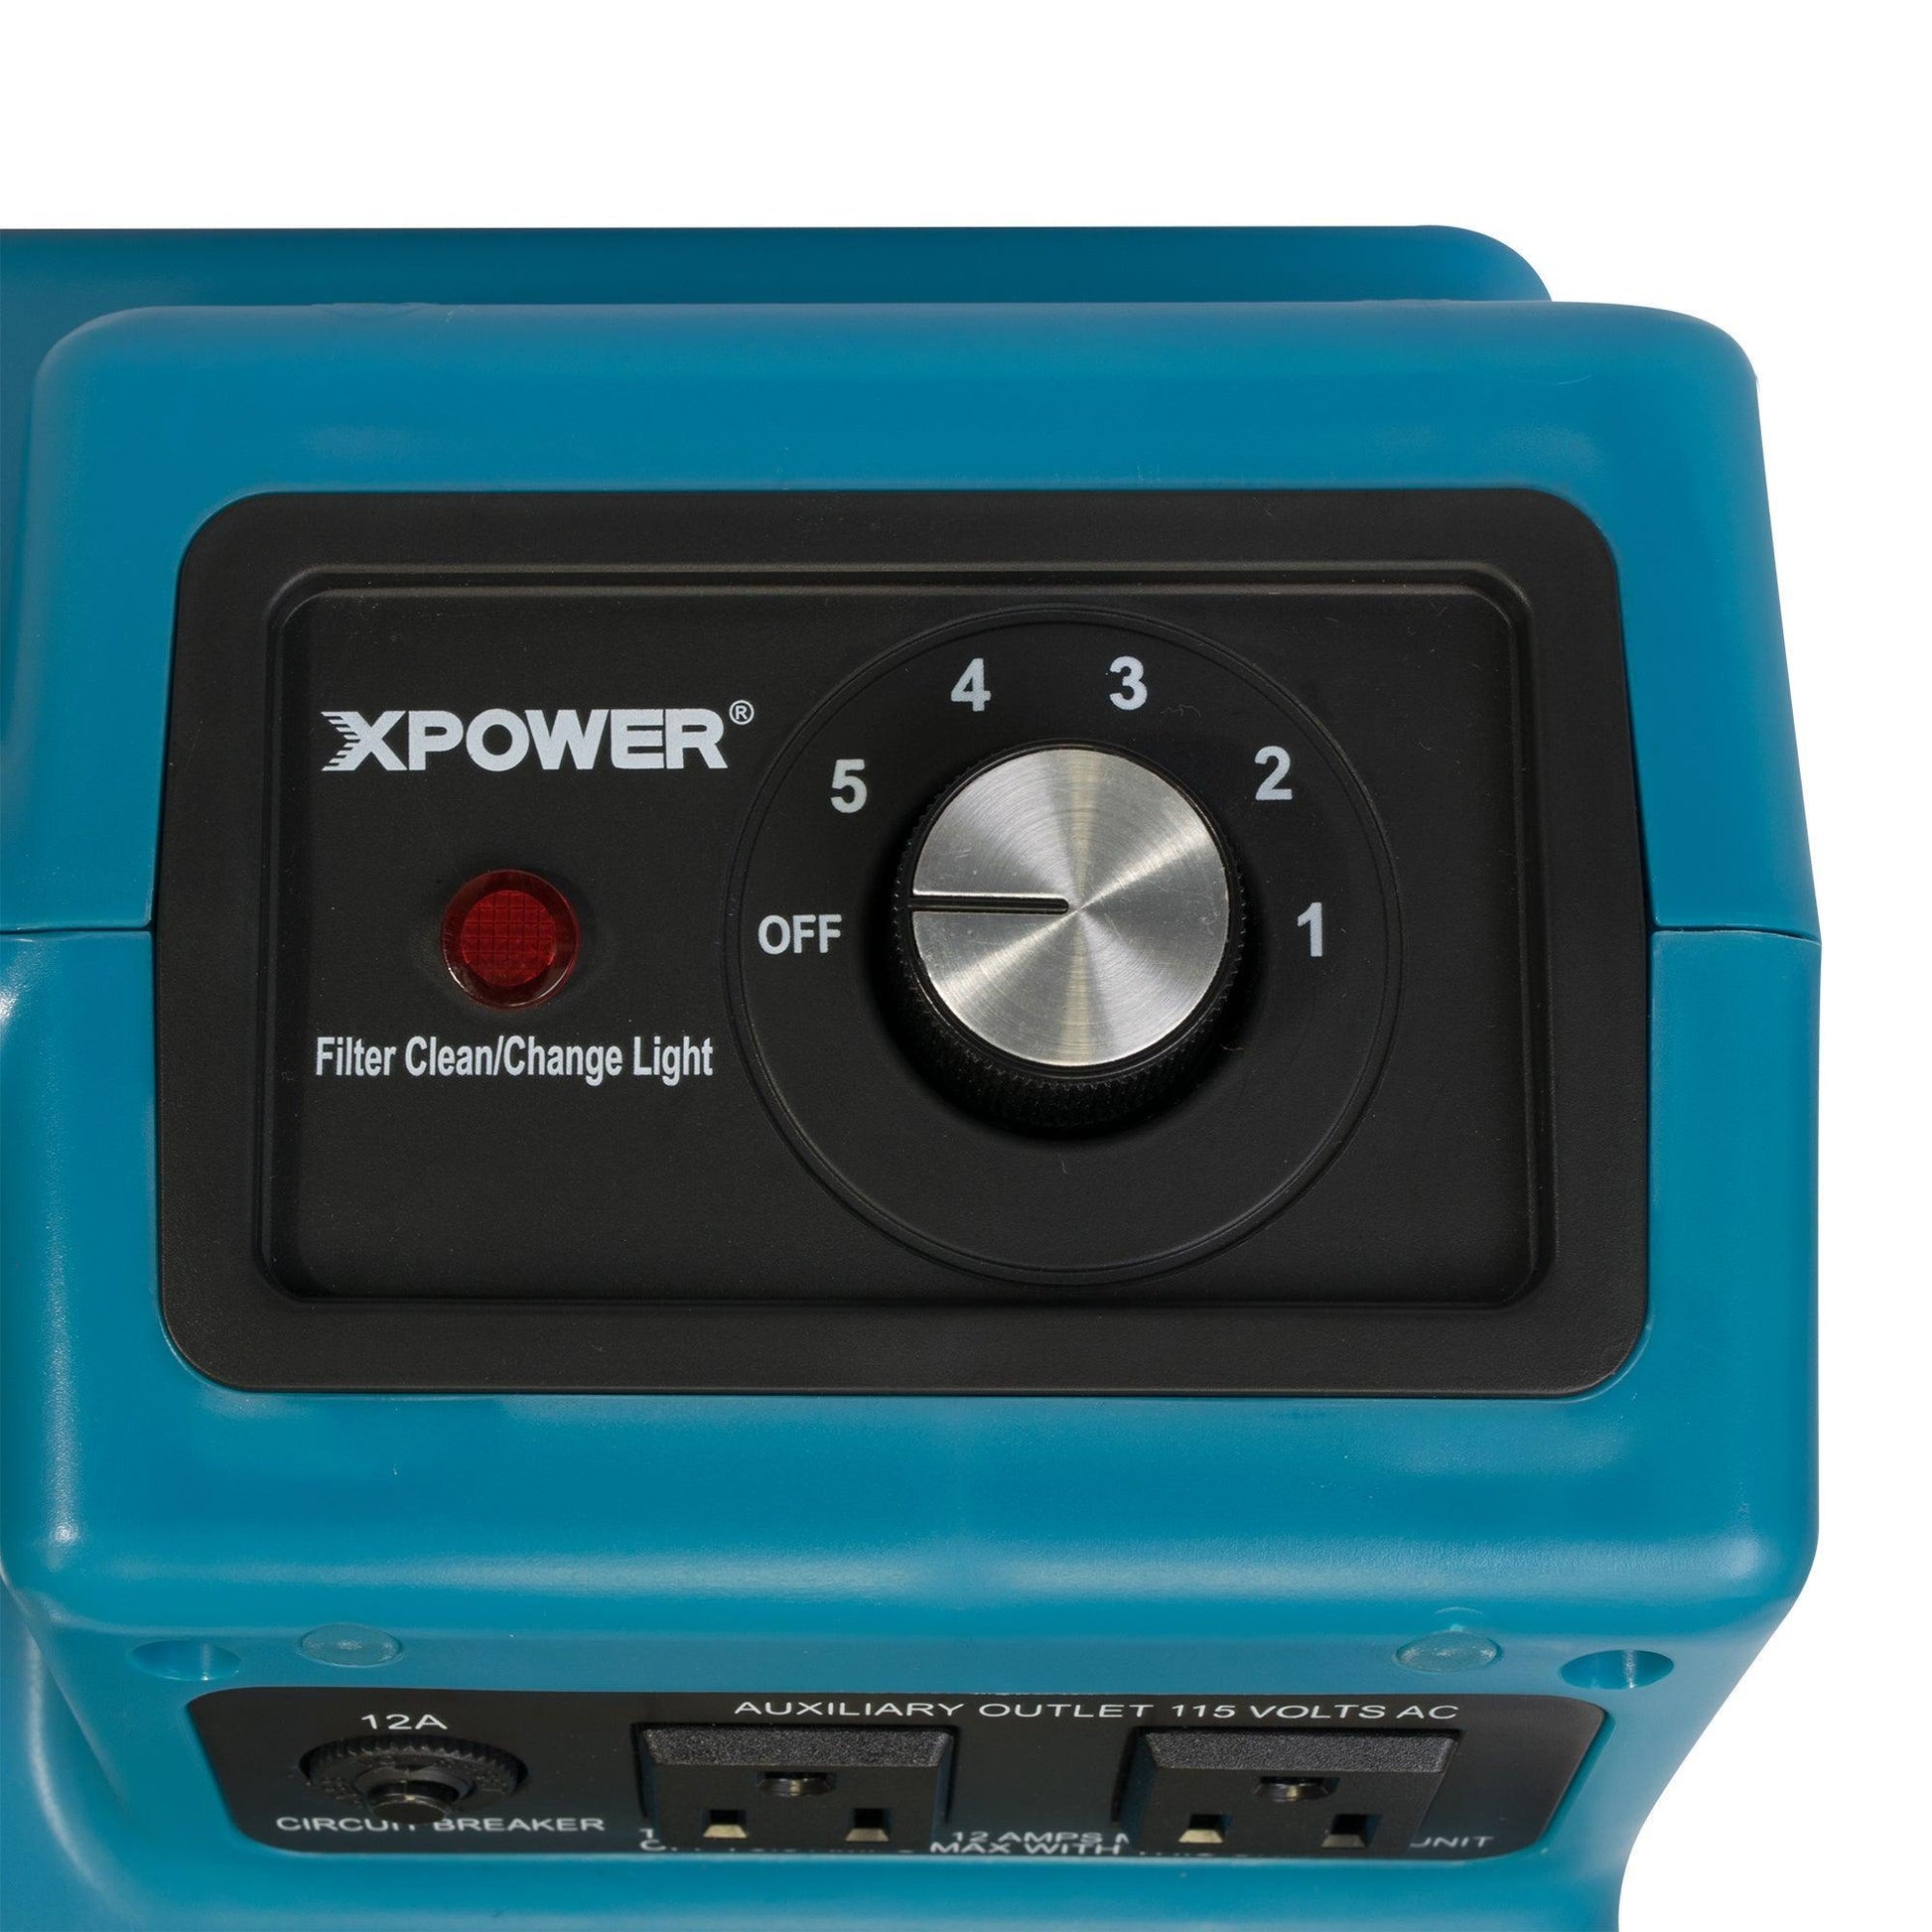 XPOWER X-2480A Commercial 3 Stage Filtration HEPA Purifier System, Negative Air Machine, airborne Air Cleaner, Mini Air Scrubber with Built-in Power Outlets - Blue - Elite Air Purifiers